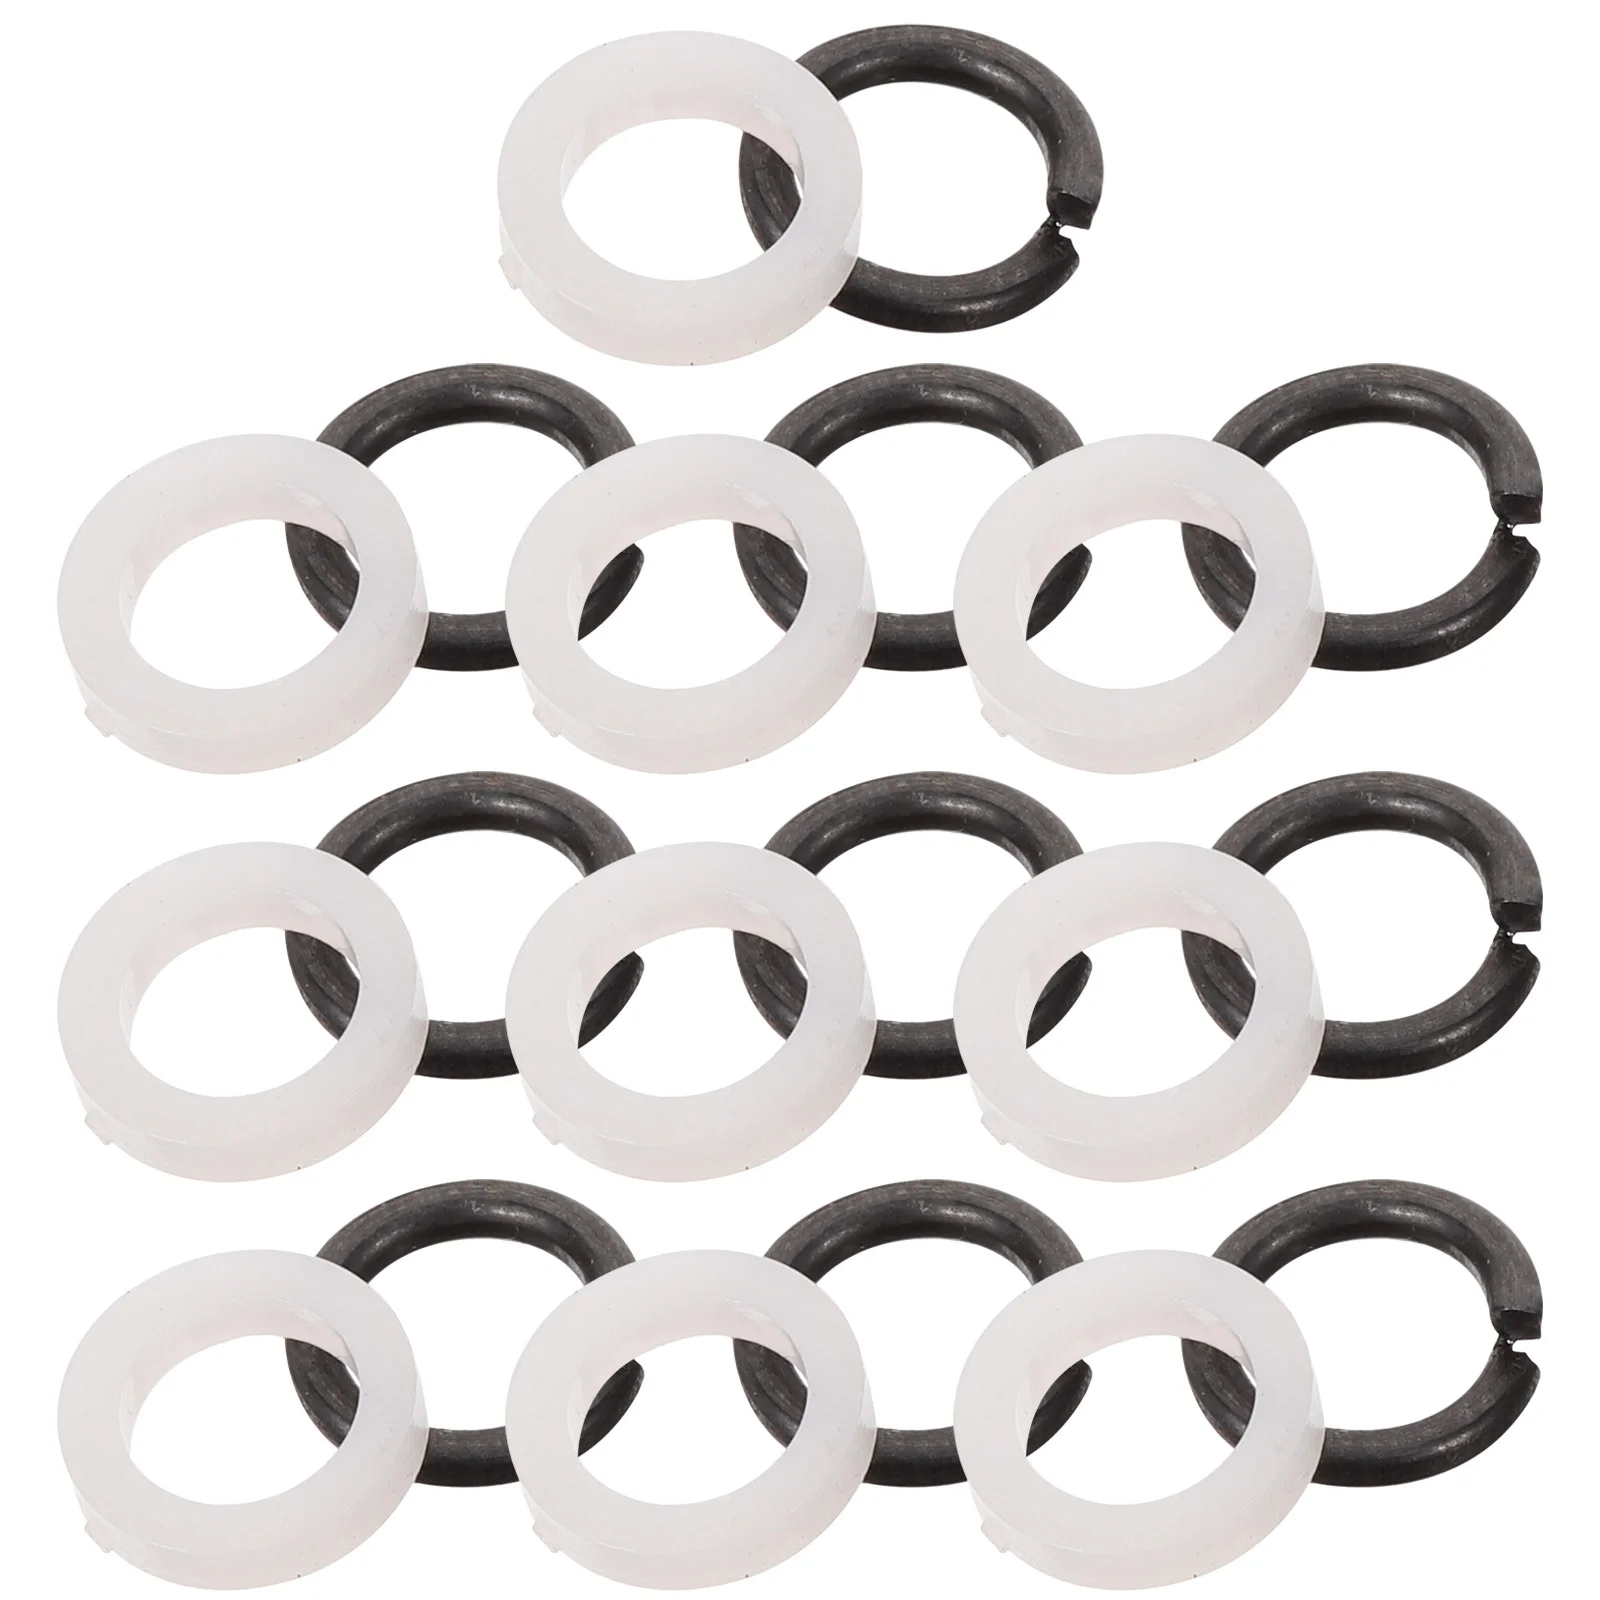 

10 Pairs Washers Guitar Peg Spacer Tuner Spacers Accessory Replaceable for Tuning Portable Supply